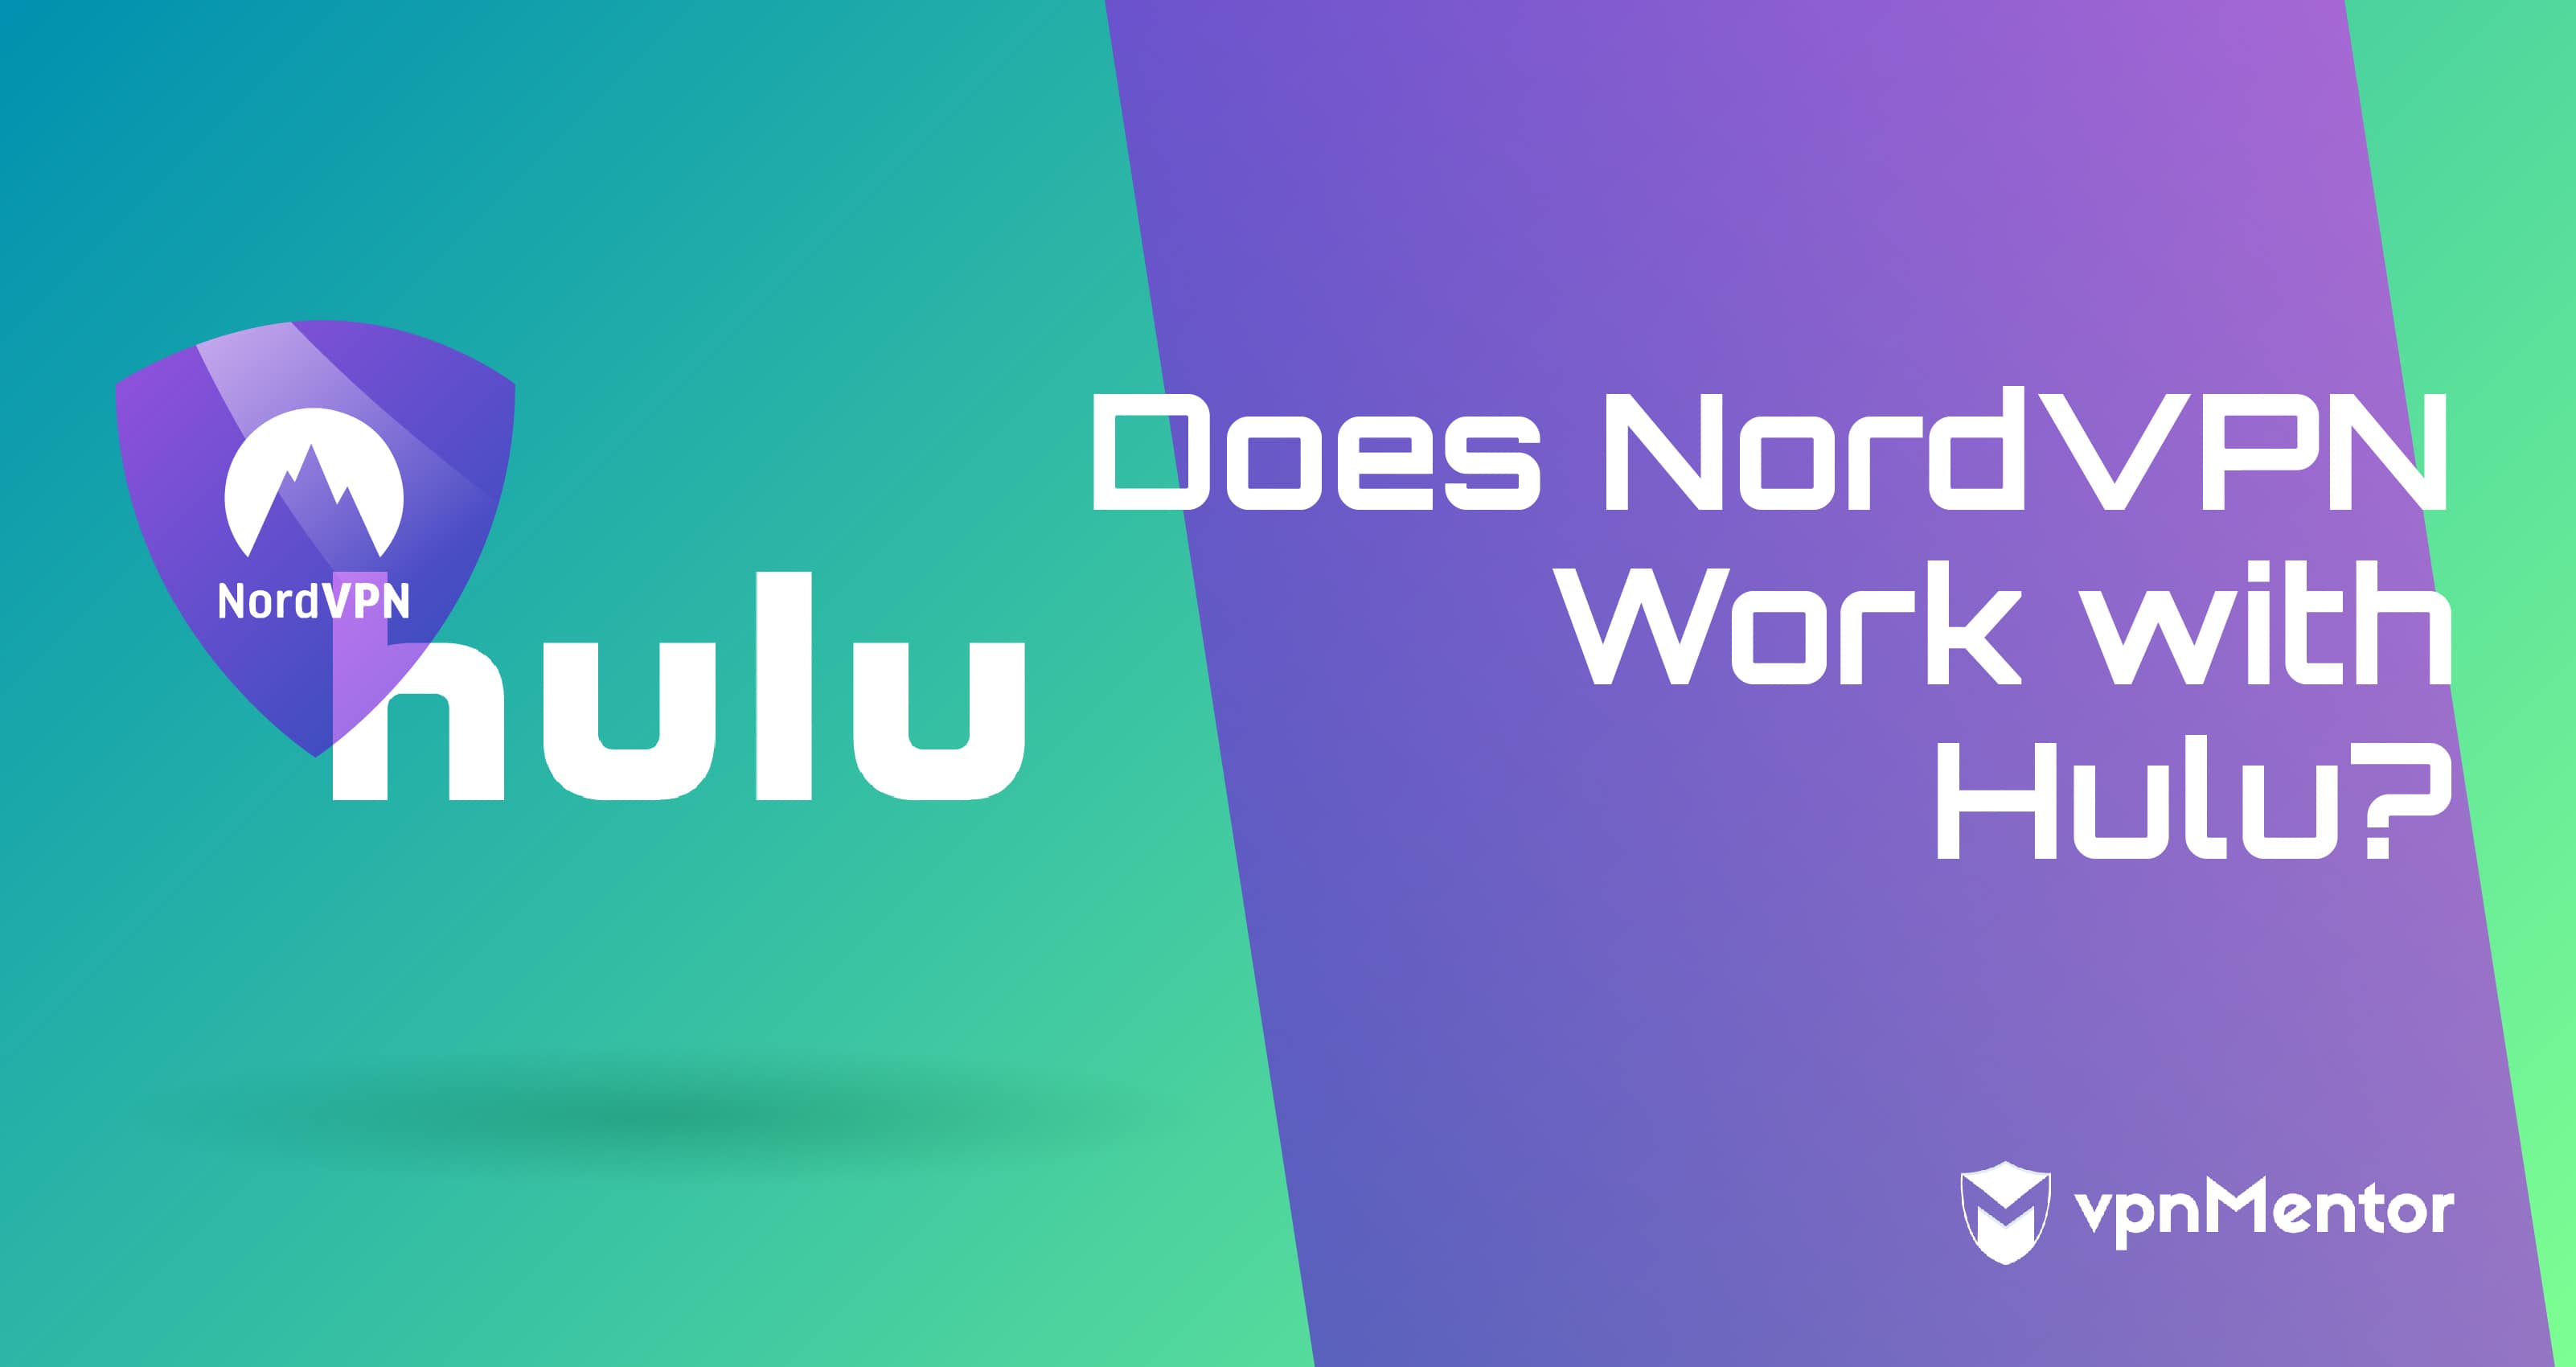 Does NordVPN Work with Hulu?